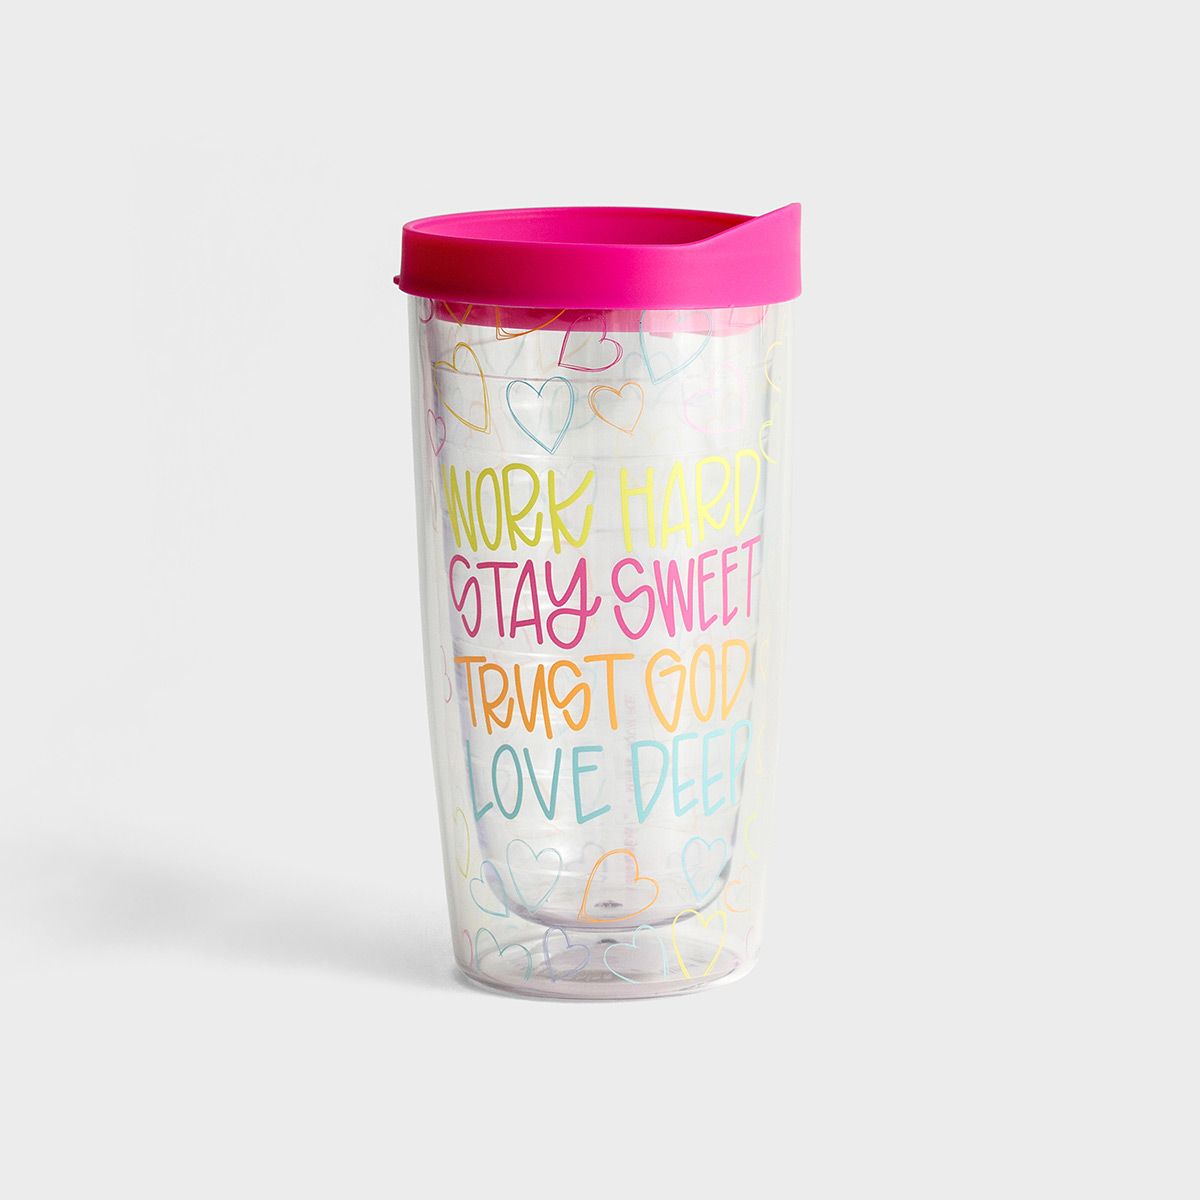 Maghon Taylor - Work Hard Stay Sweet - Insulated Tumbler | DaySpring